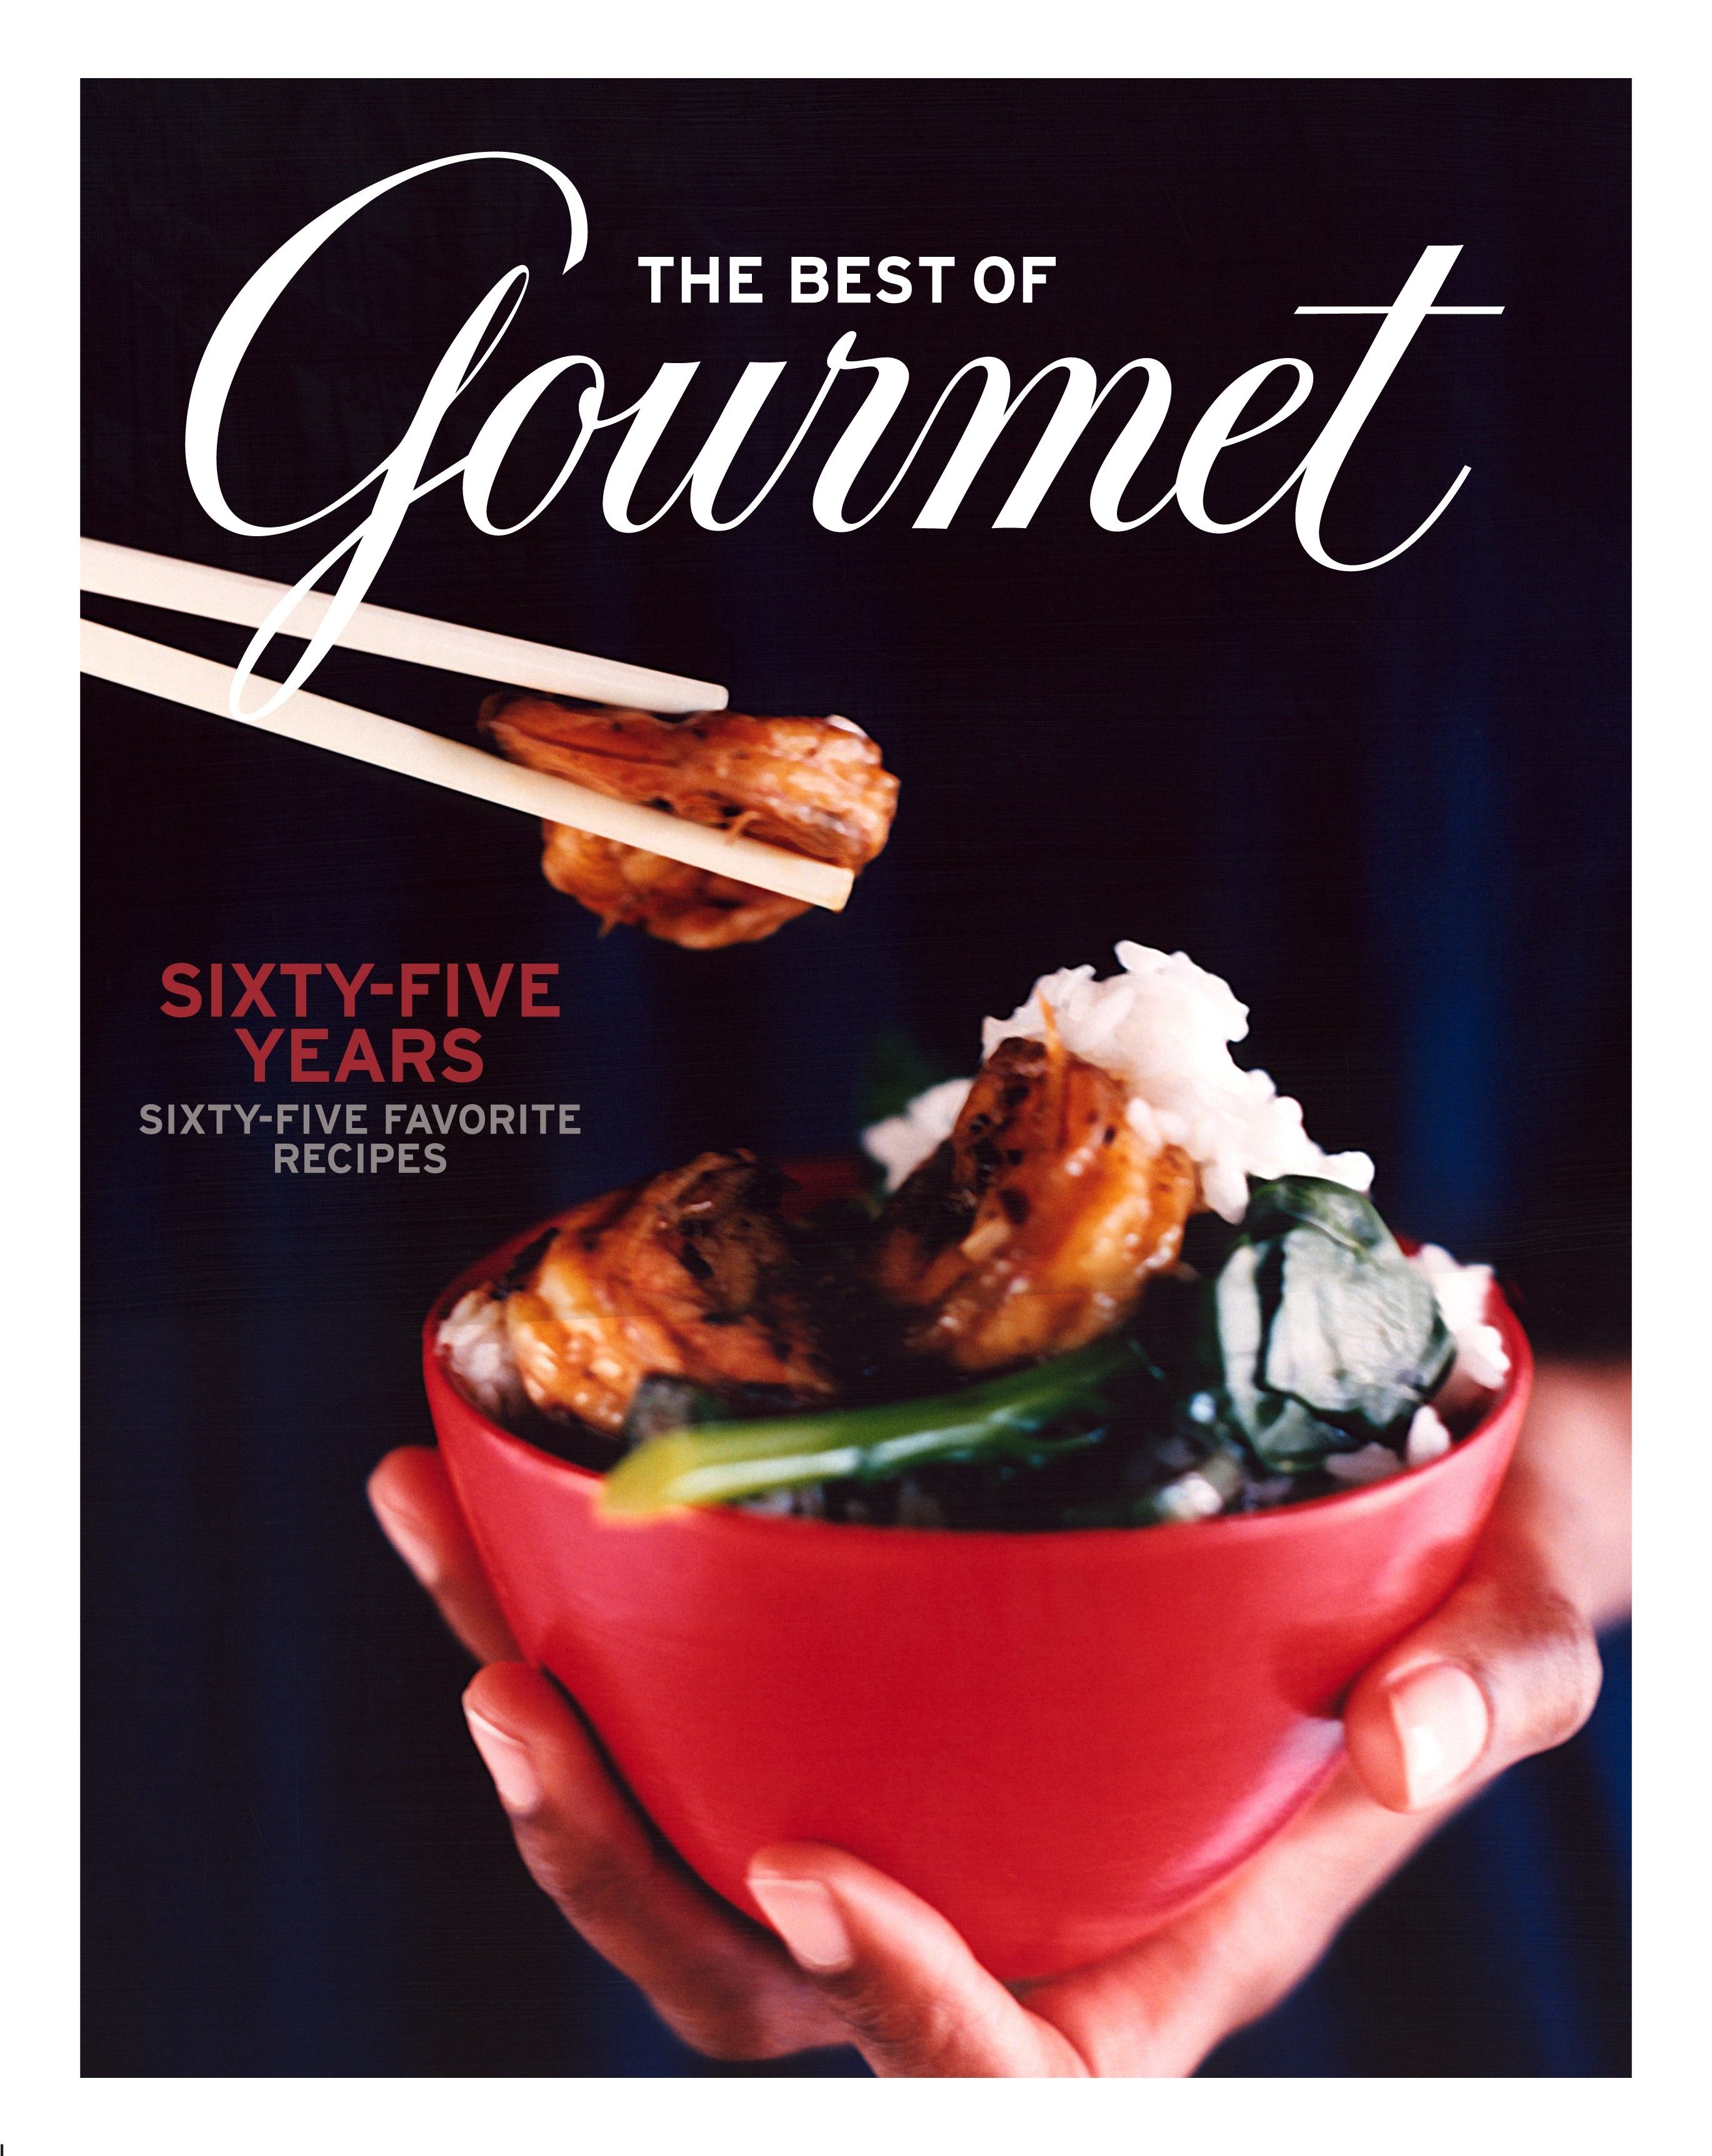 An iconic issue of Gourmet magazine from 2007; Save Me the Plums is out this spring